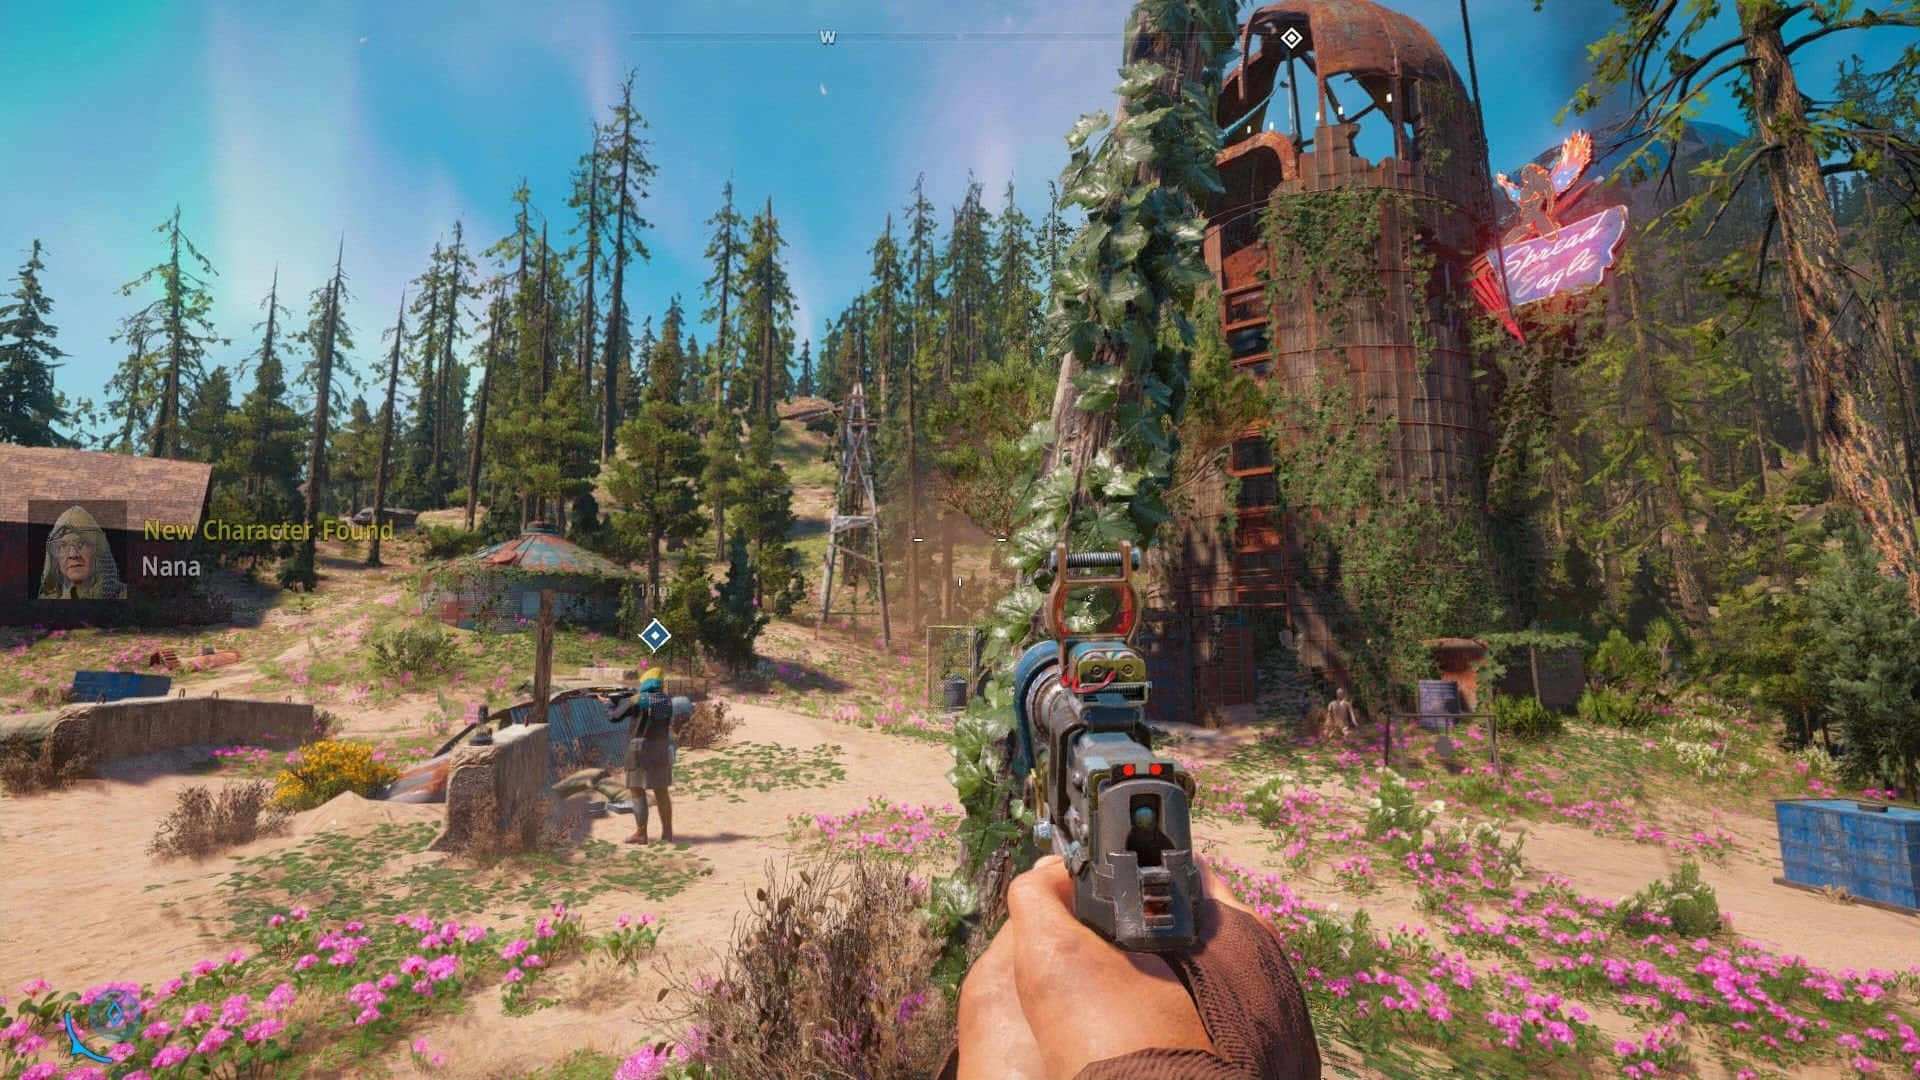 A Screenshot Of A Game With A Gun In The Background